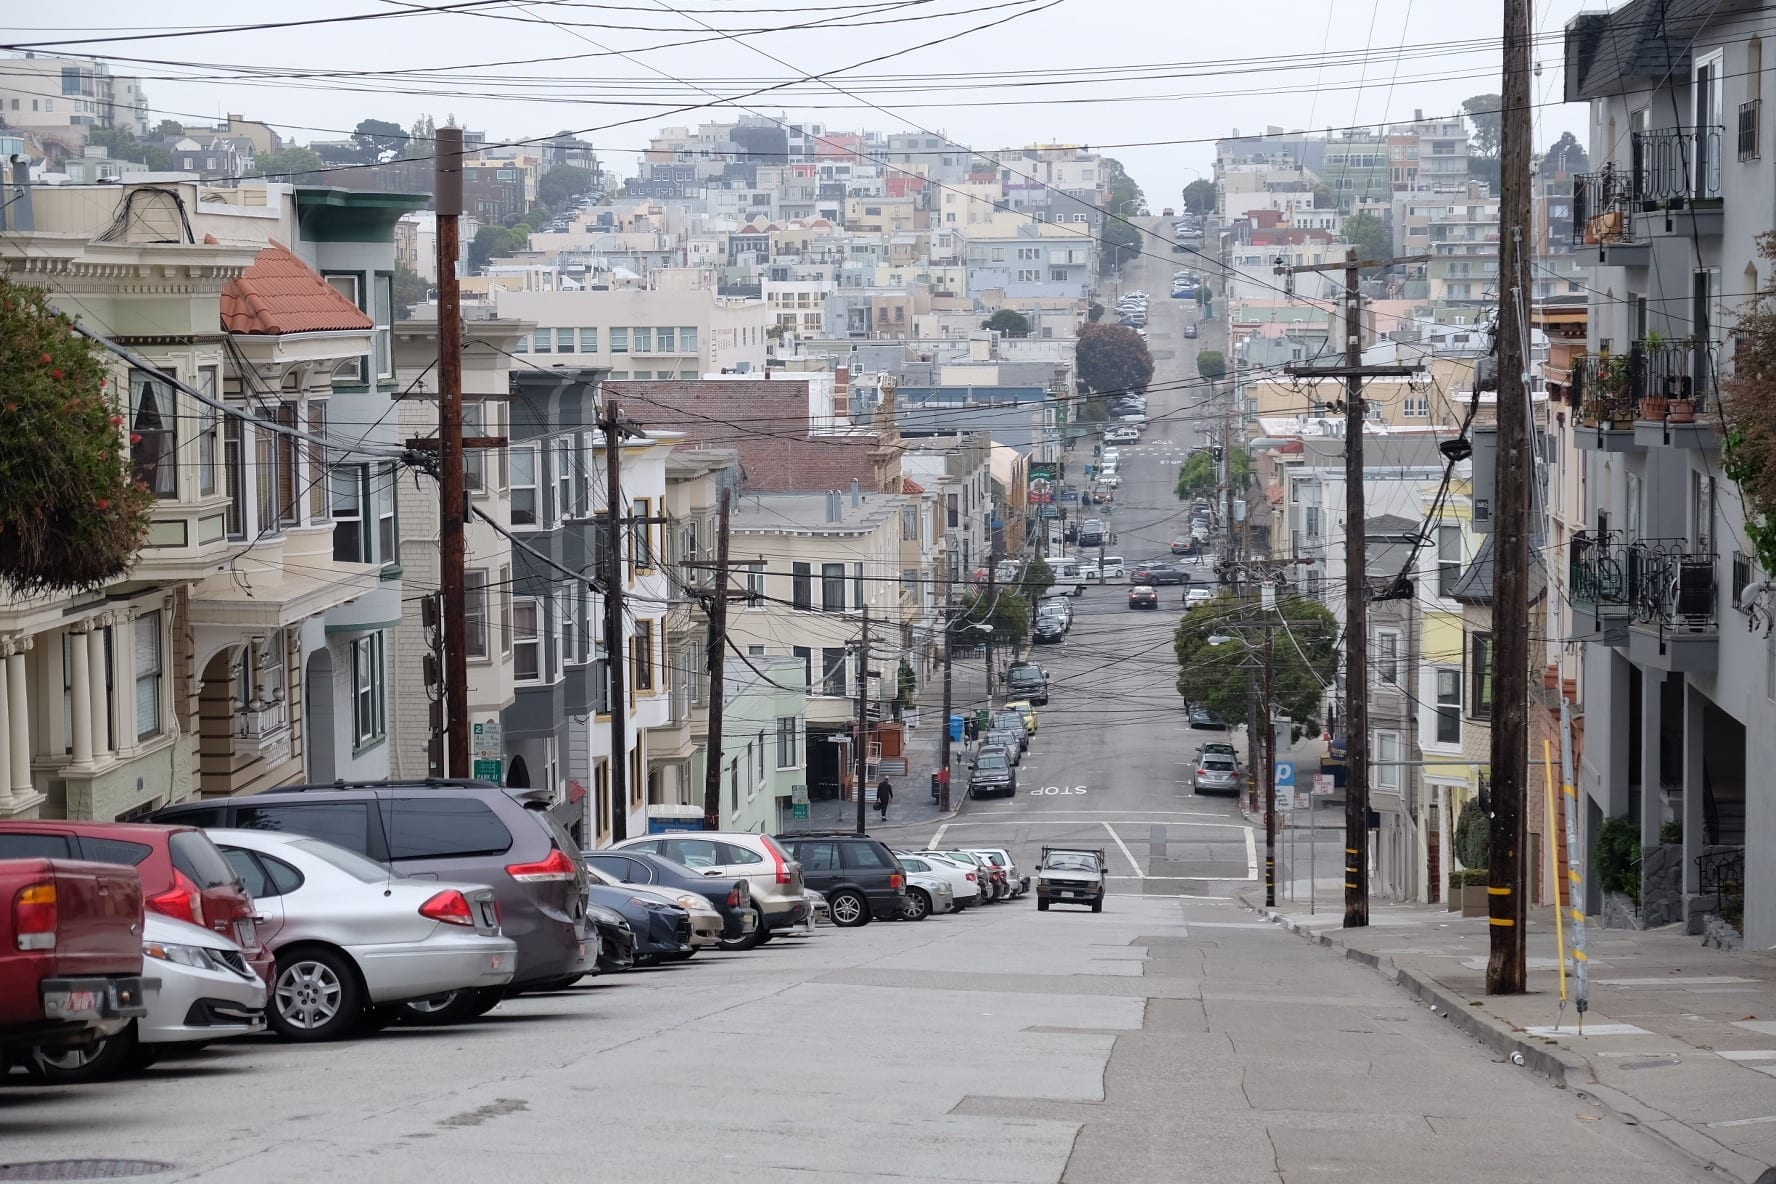 Gray morning in Russian hill, San Francisco, houses descending down steep hills in San Francisco.